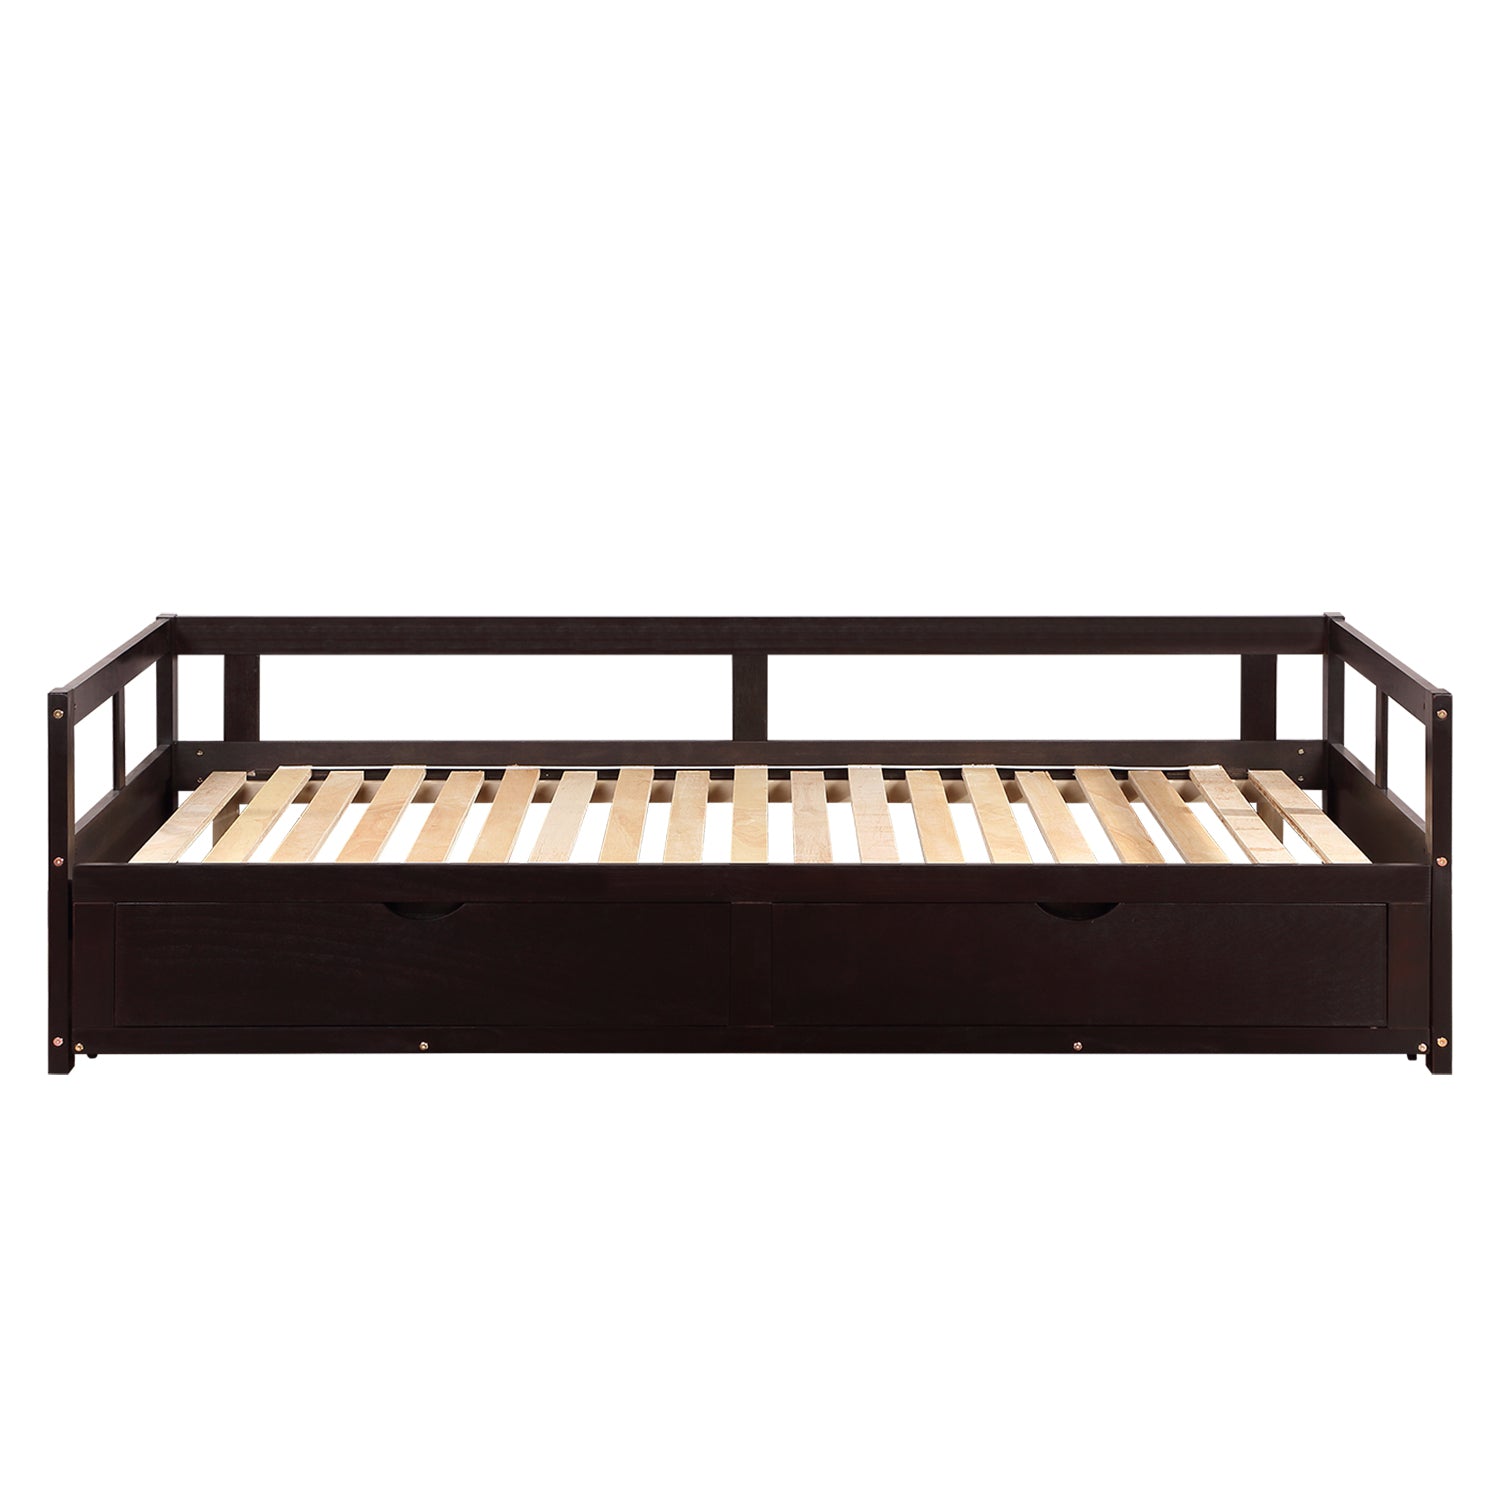 ZNTS Wooden Daybed with Trundle Bed and Two Storage Drawers , Extendable Bed Daybed,Sofa Bed for Bedroom WF194973AAP